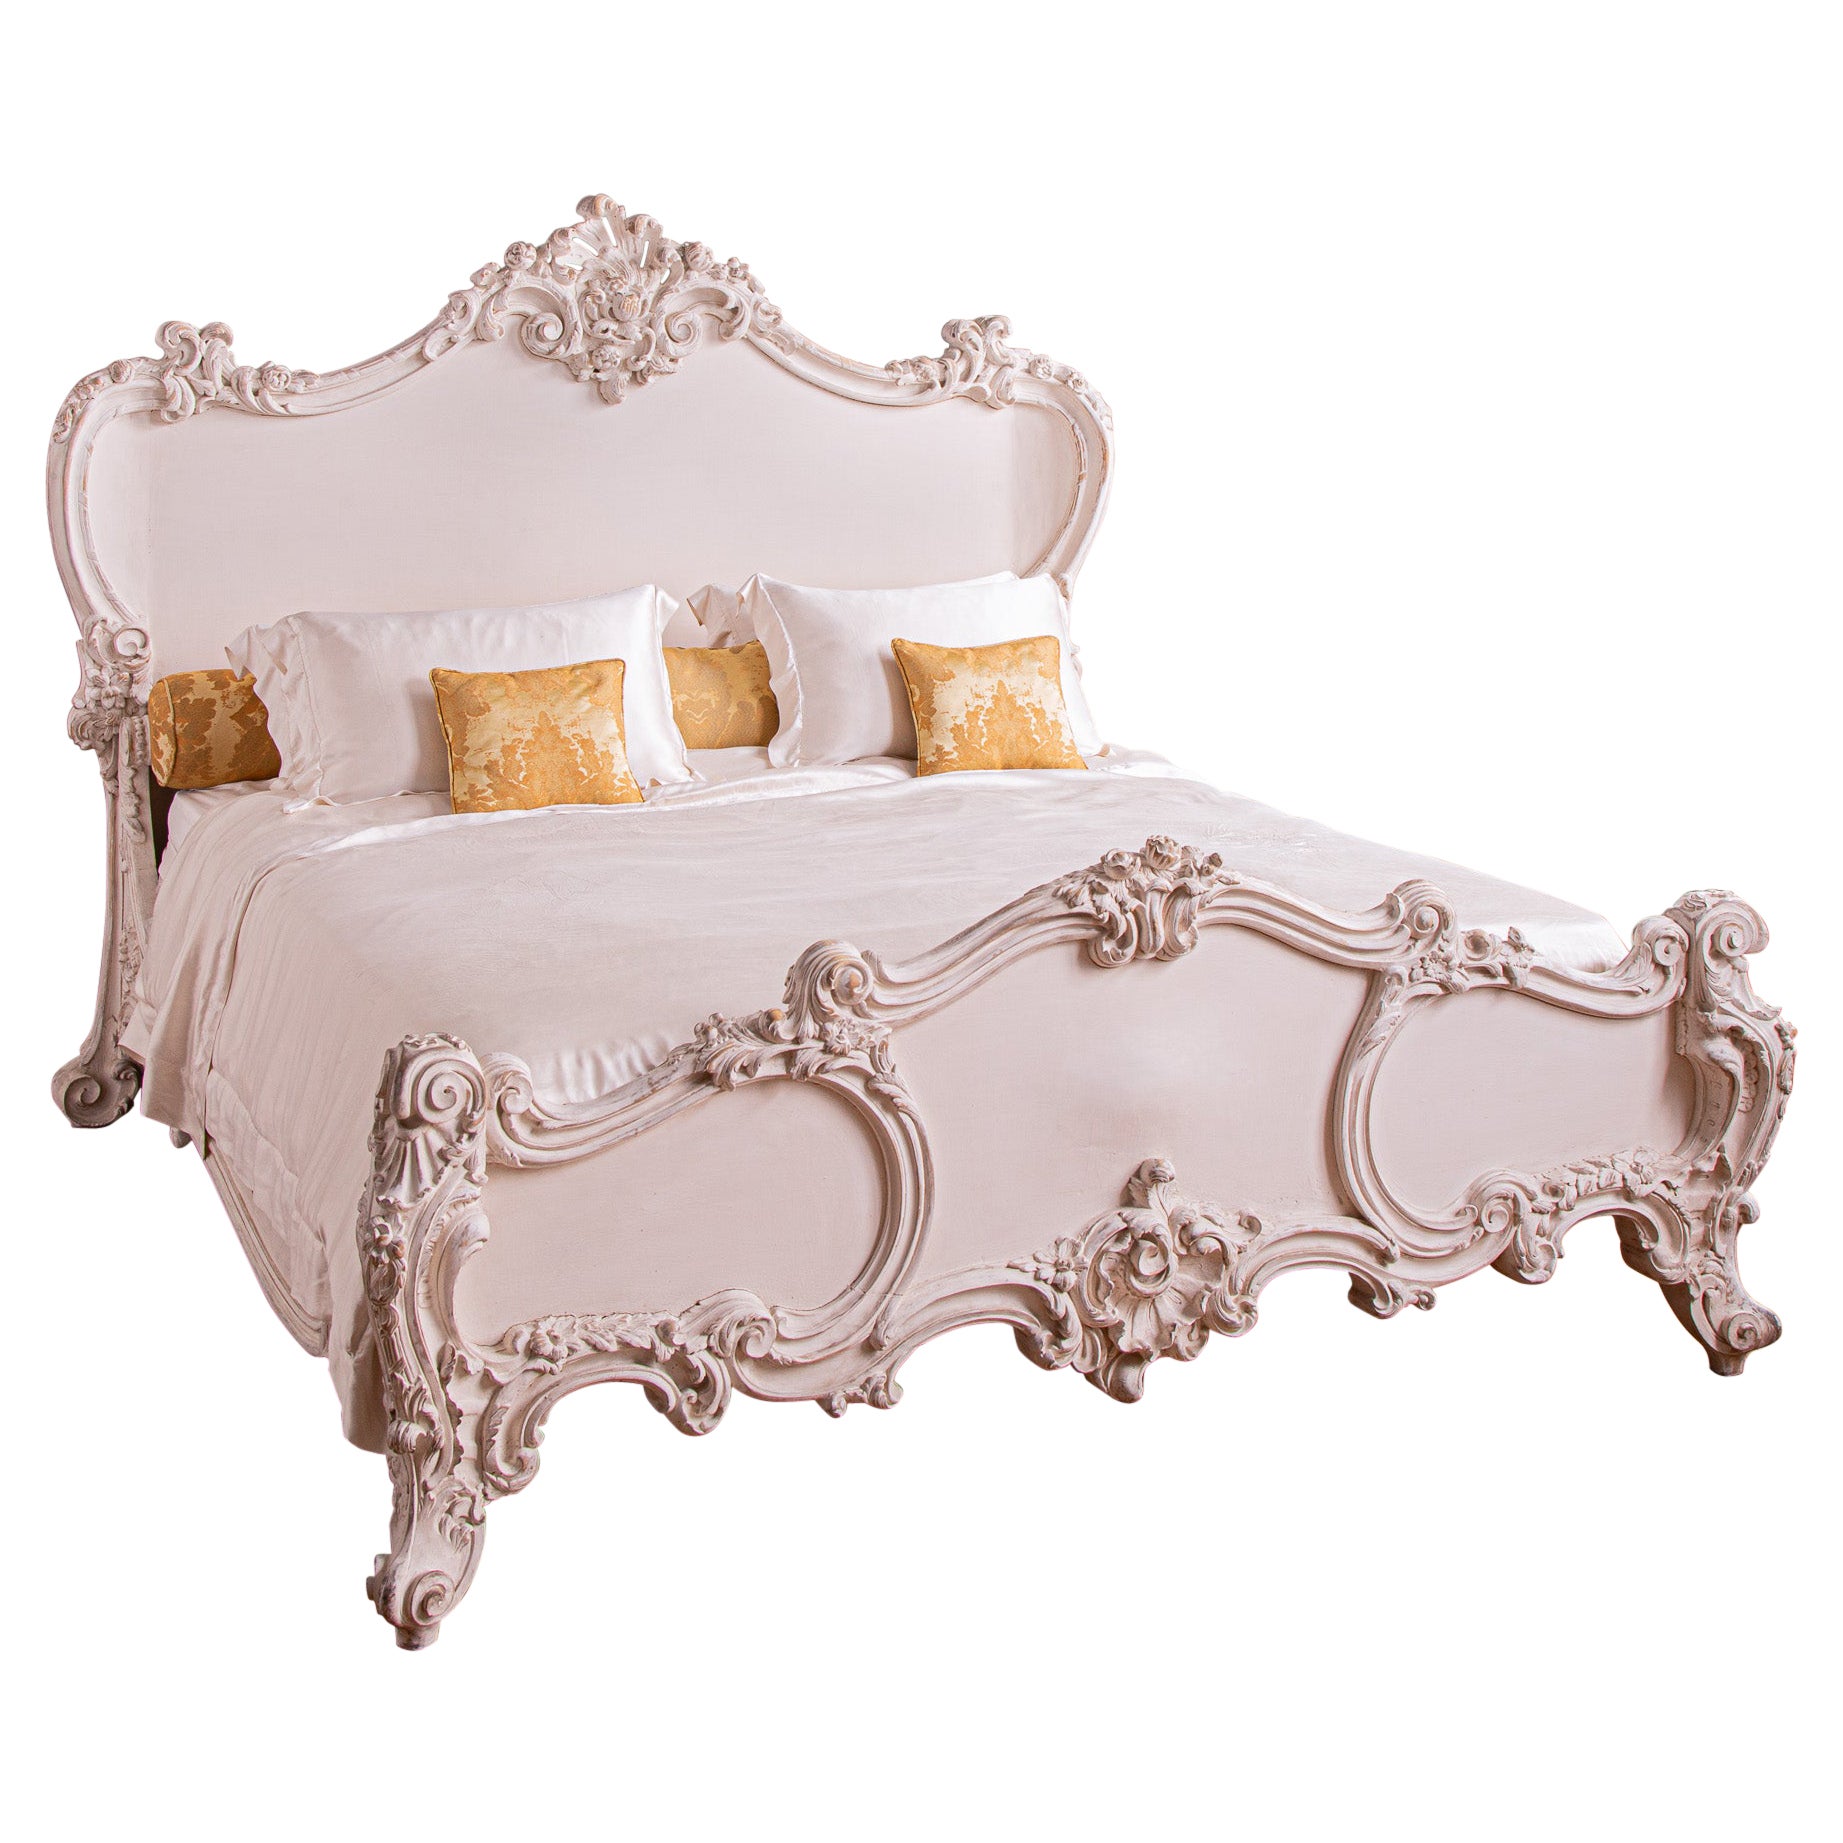 A French Rococo Style 'Cherub' Bed Painted In White Gesso By La Maison London For Sale